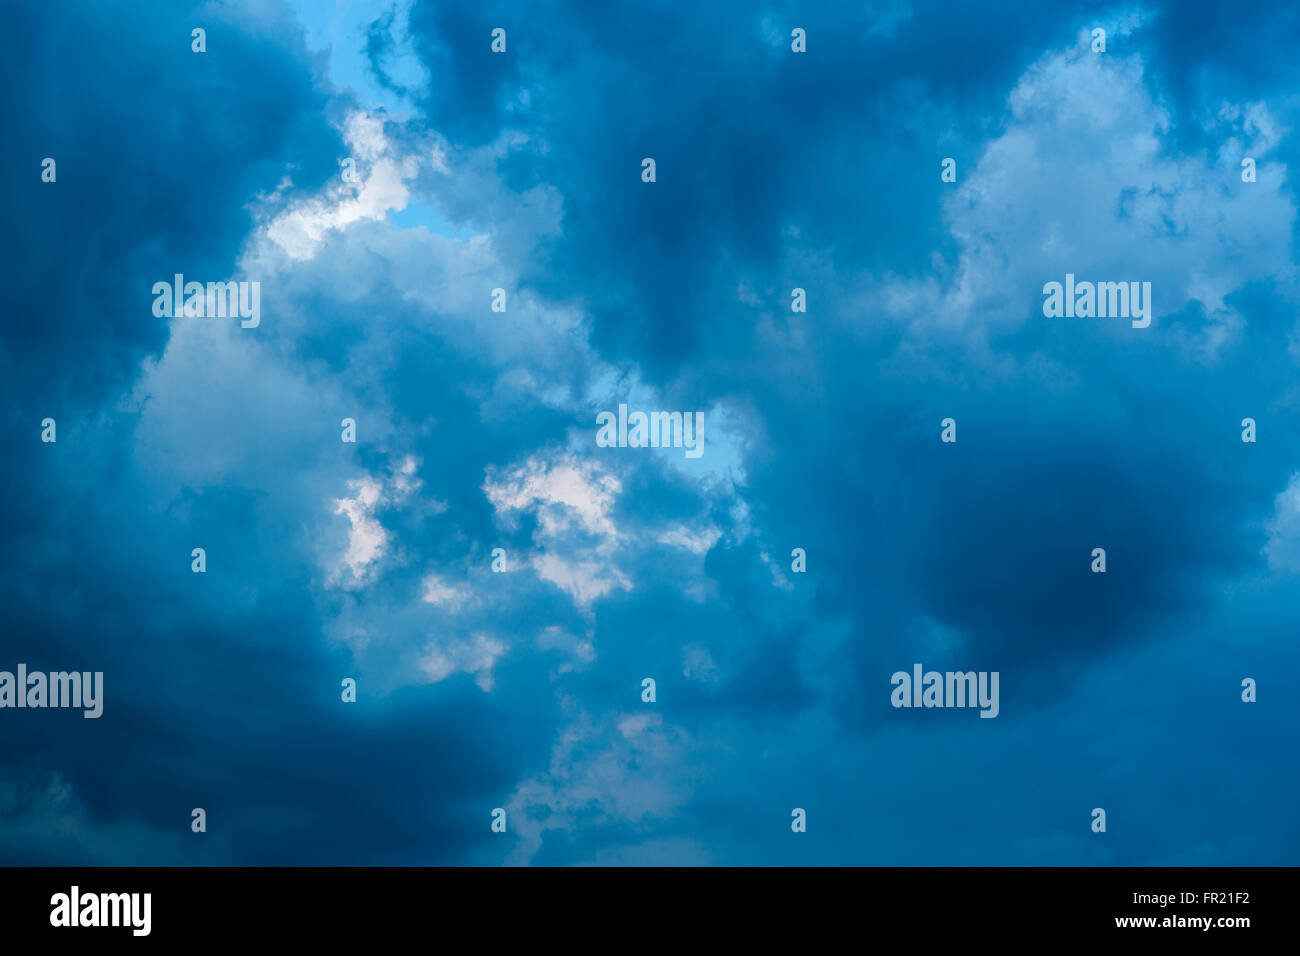 Dramatic clouds on blue sky after thunderstorm Stock Photo